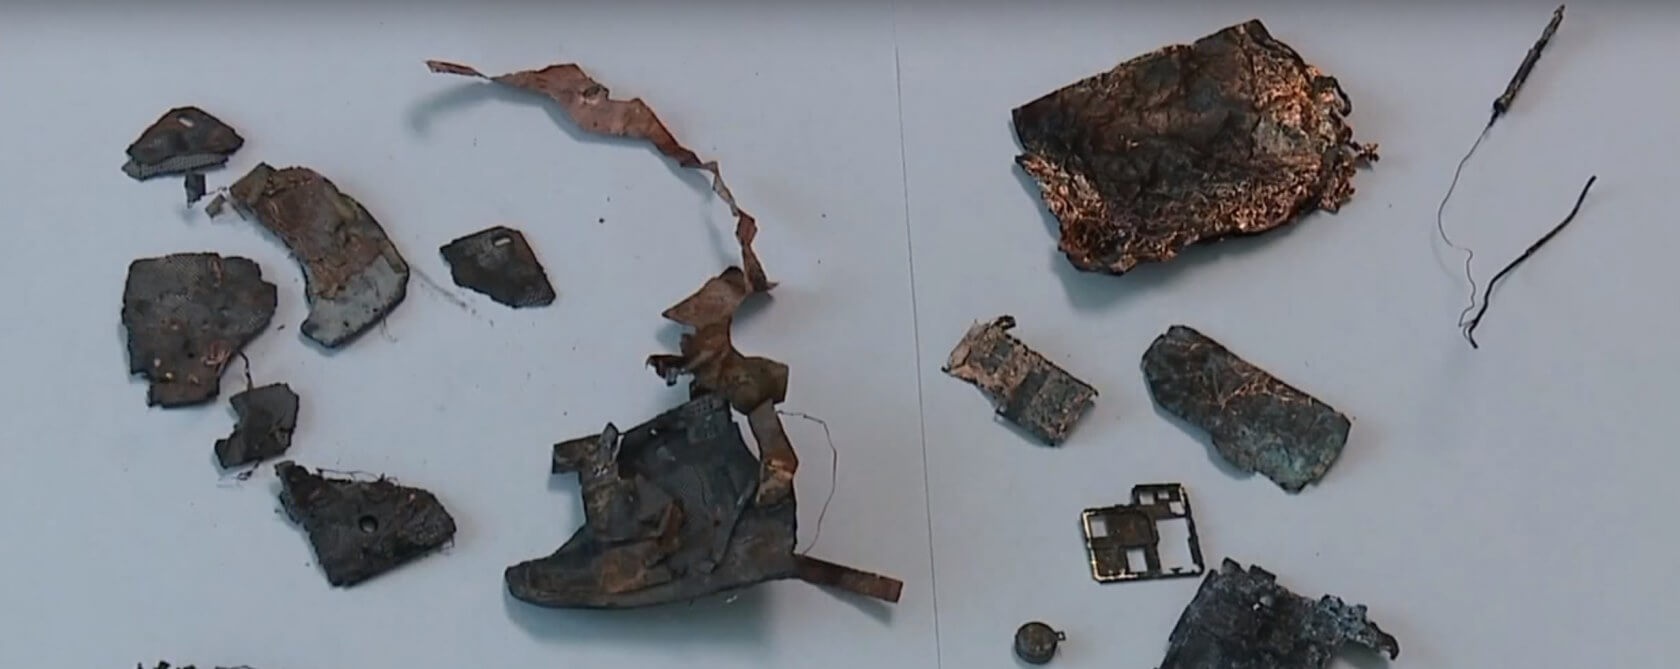 Woman says her Samsung phone exploded, started fire that destroyed car